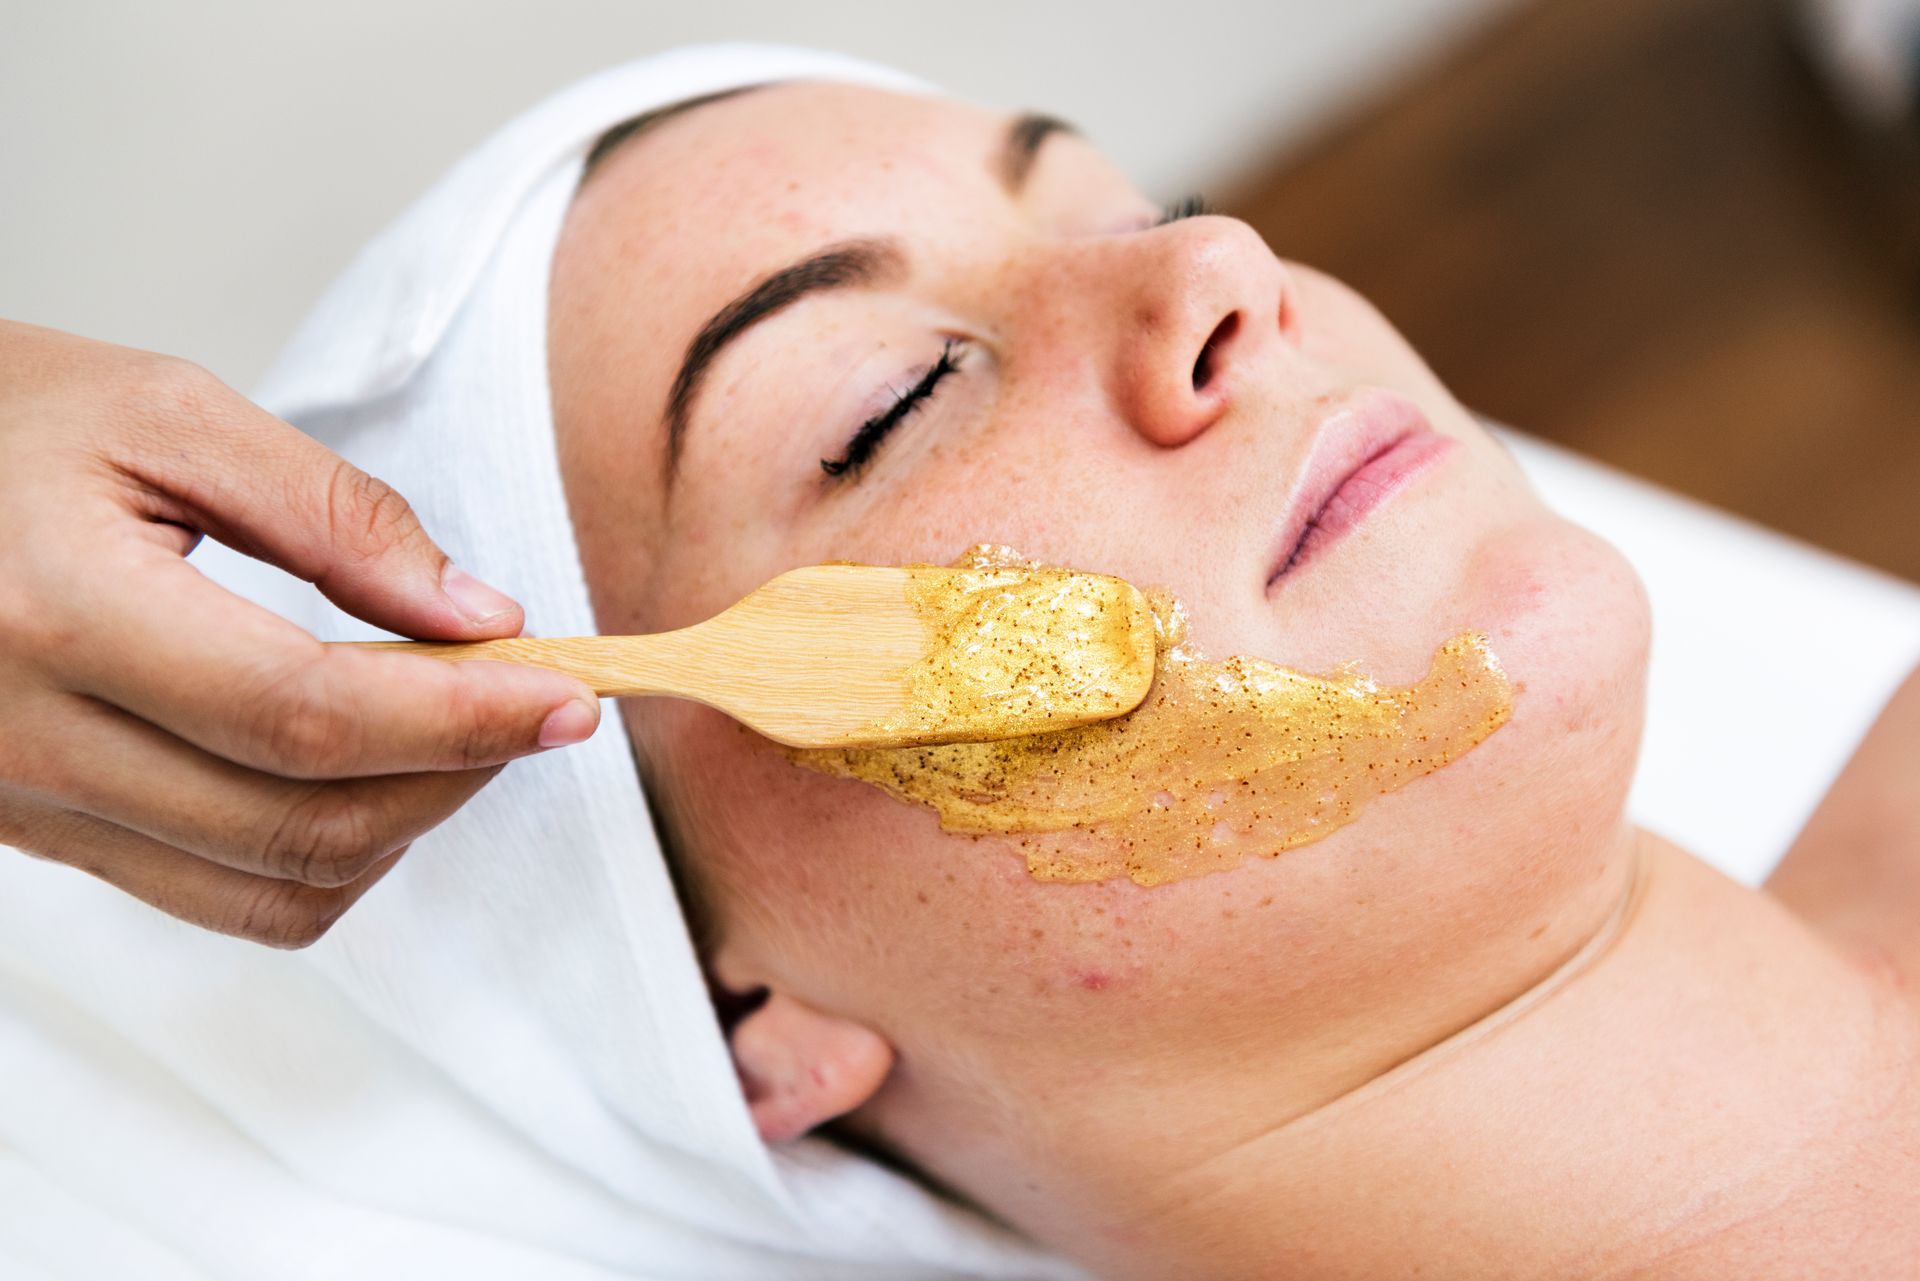 a woman is getting a facial treatment with a wooden spoon